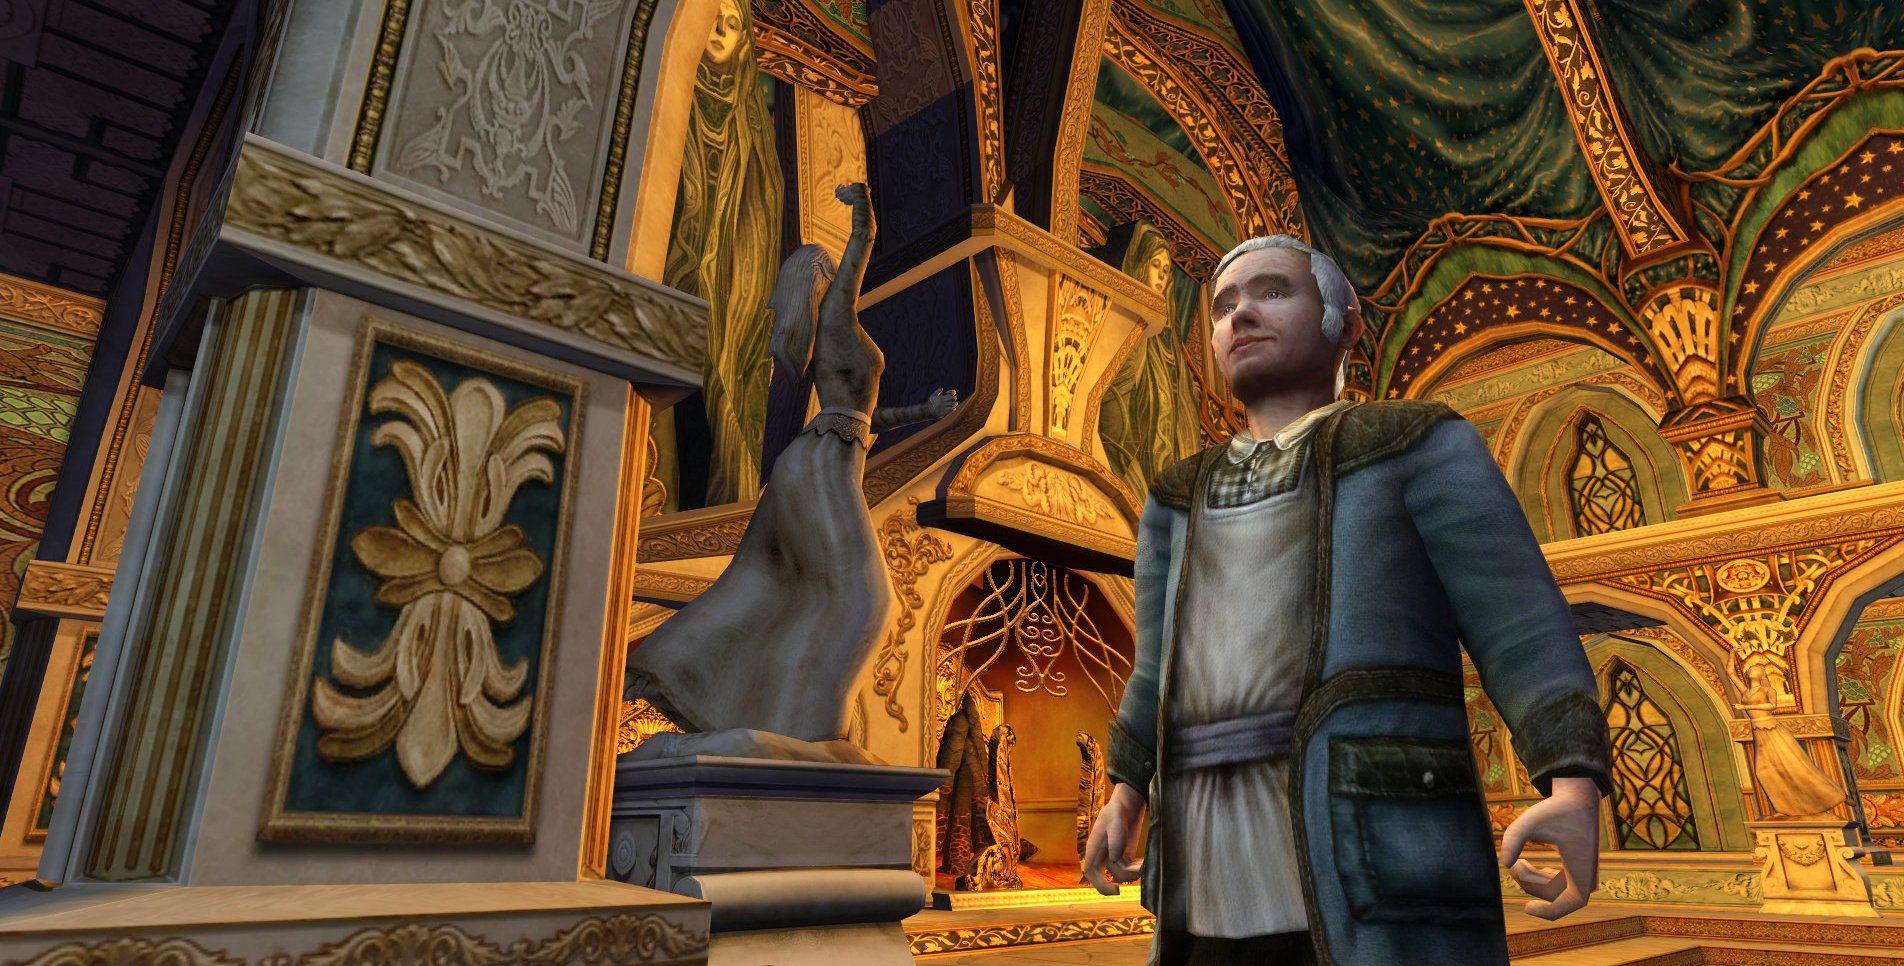 LOTRO Events Calendar 2021 Schedule of Events, Festivals & Boosts